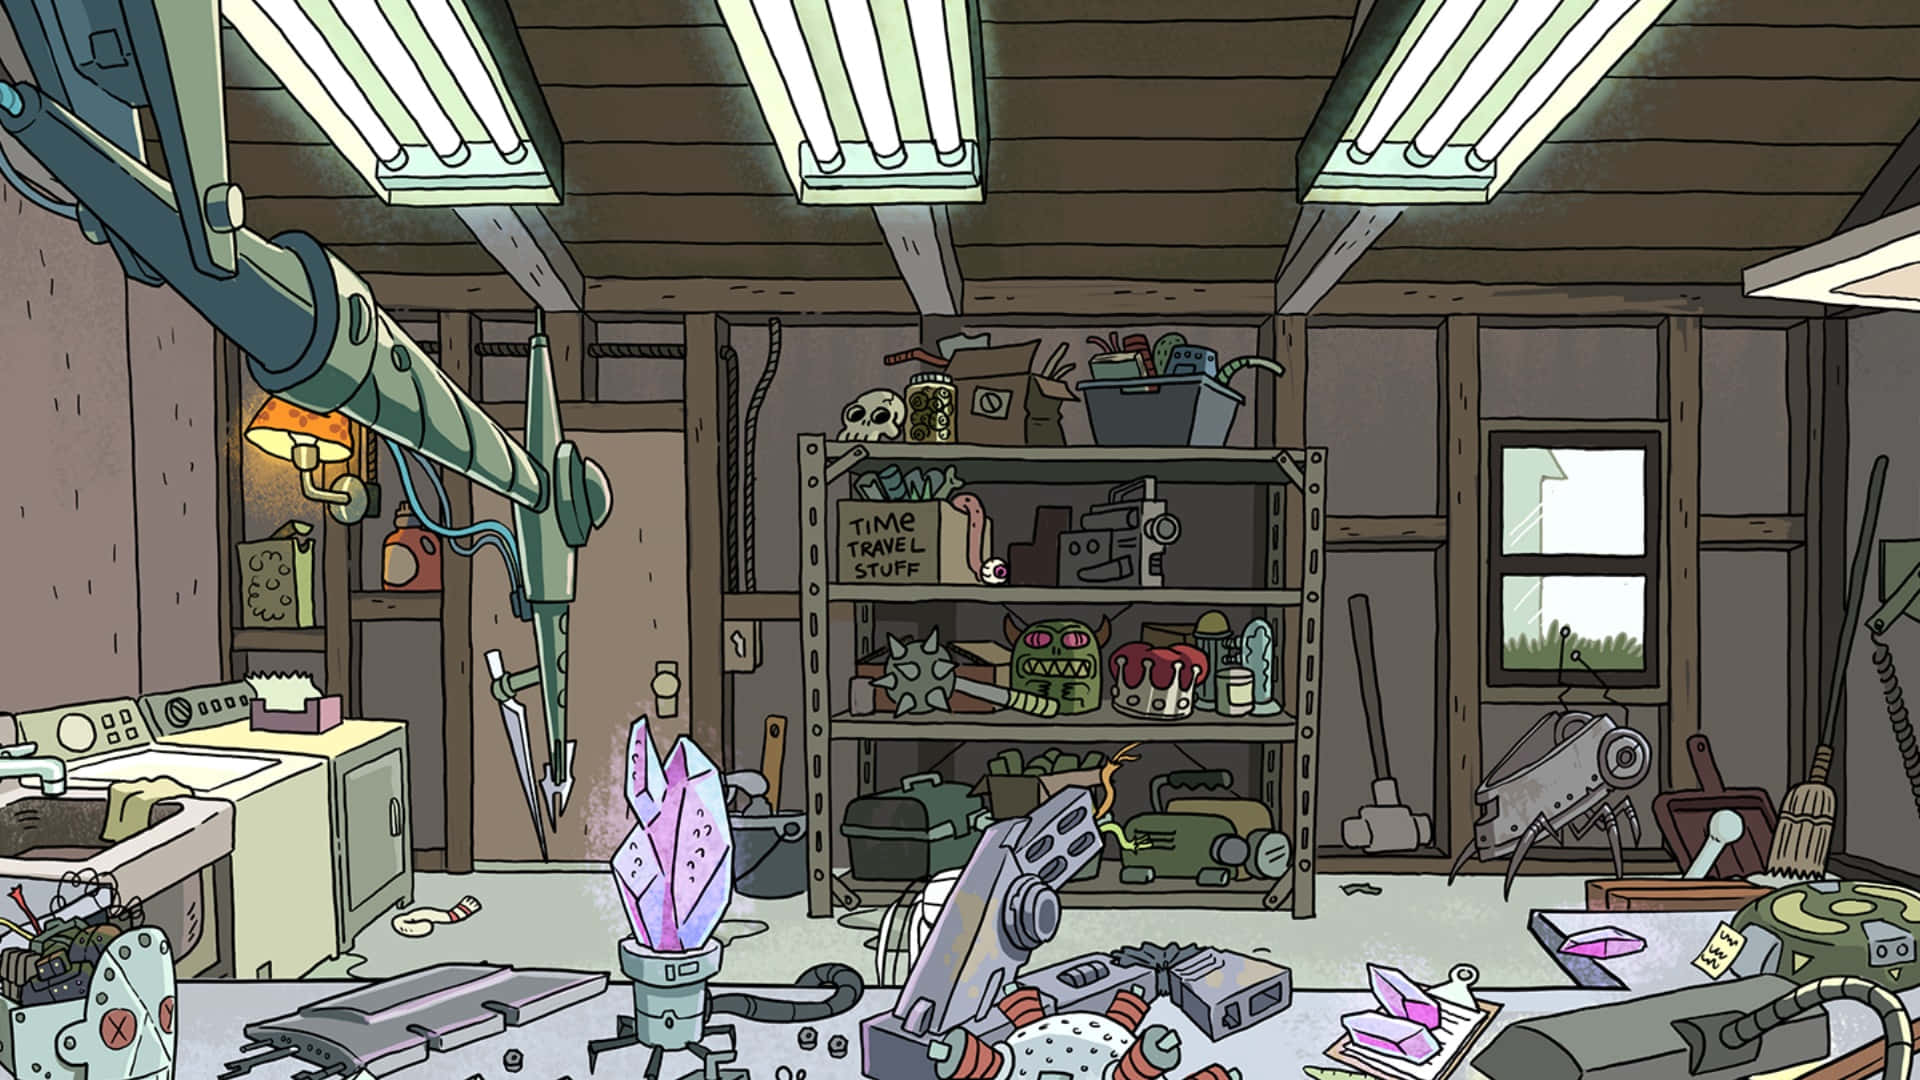 A Cartoon Image Of A Garage With A Lot Of Junk